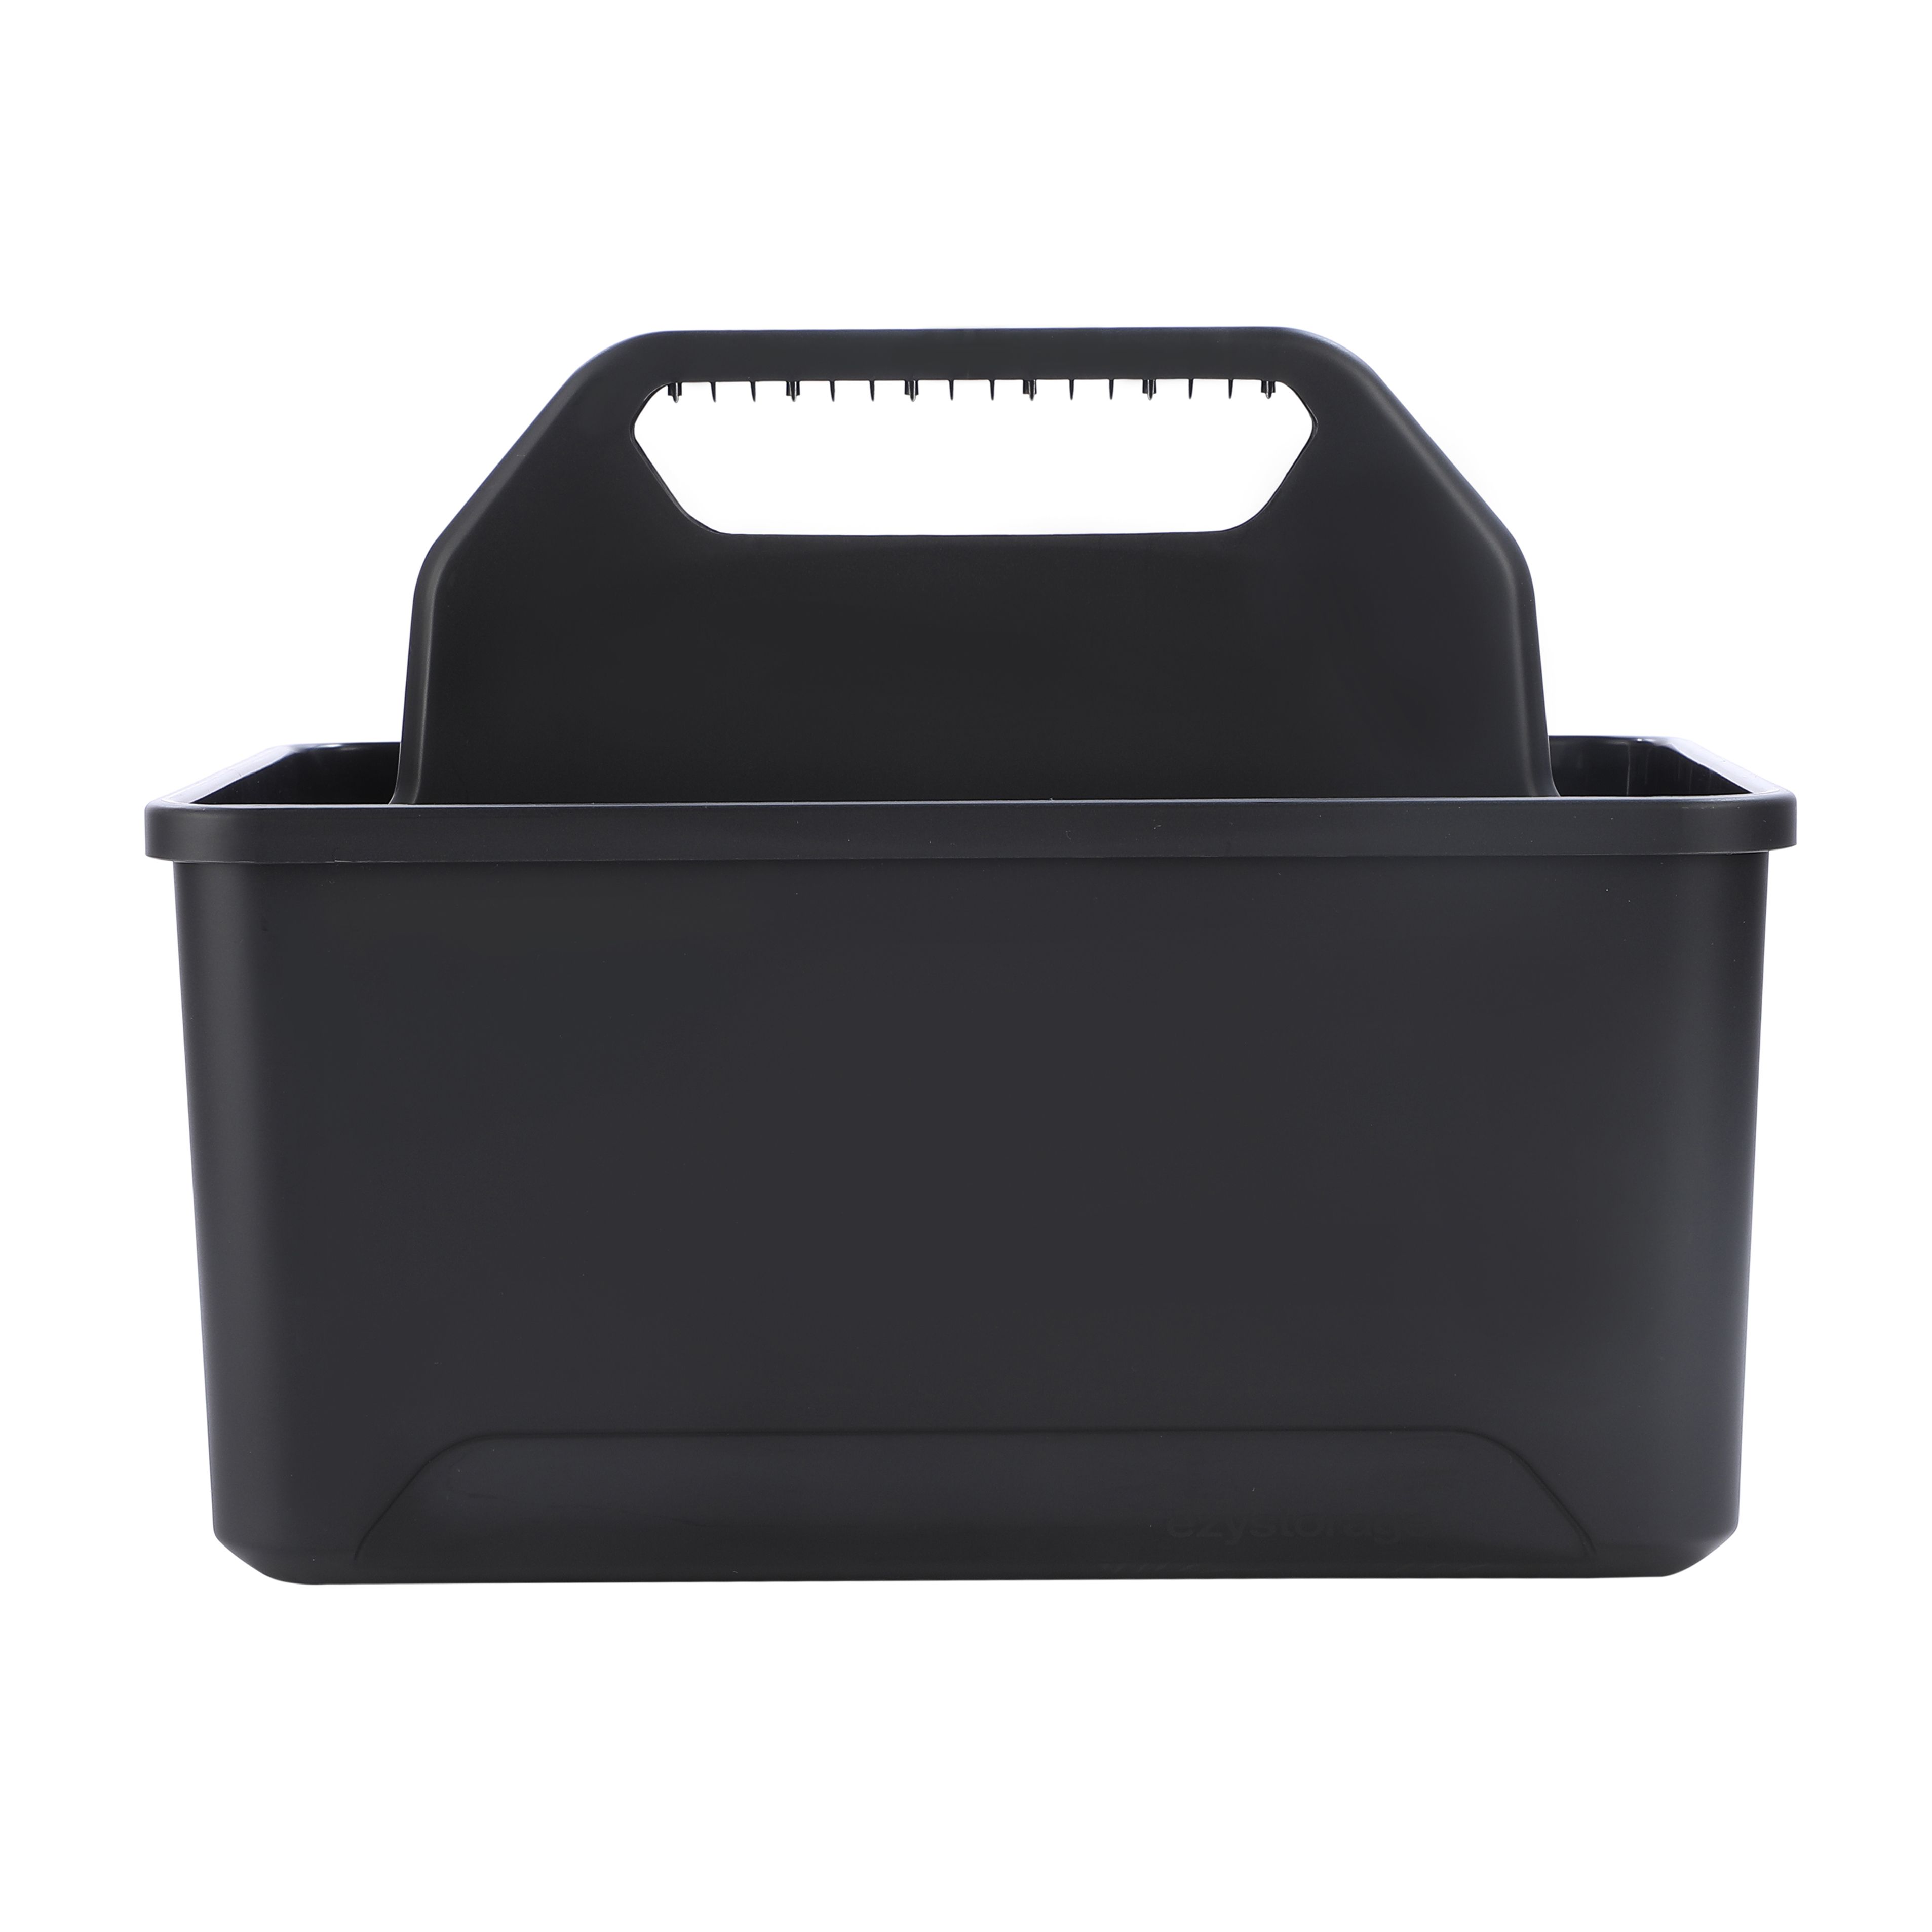 Ezy Storage Bunker tough Grey Insert caddy with 2 compartment